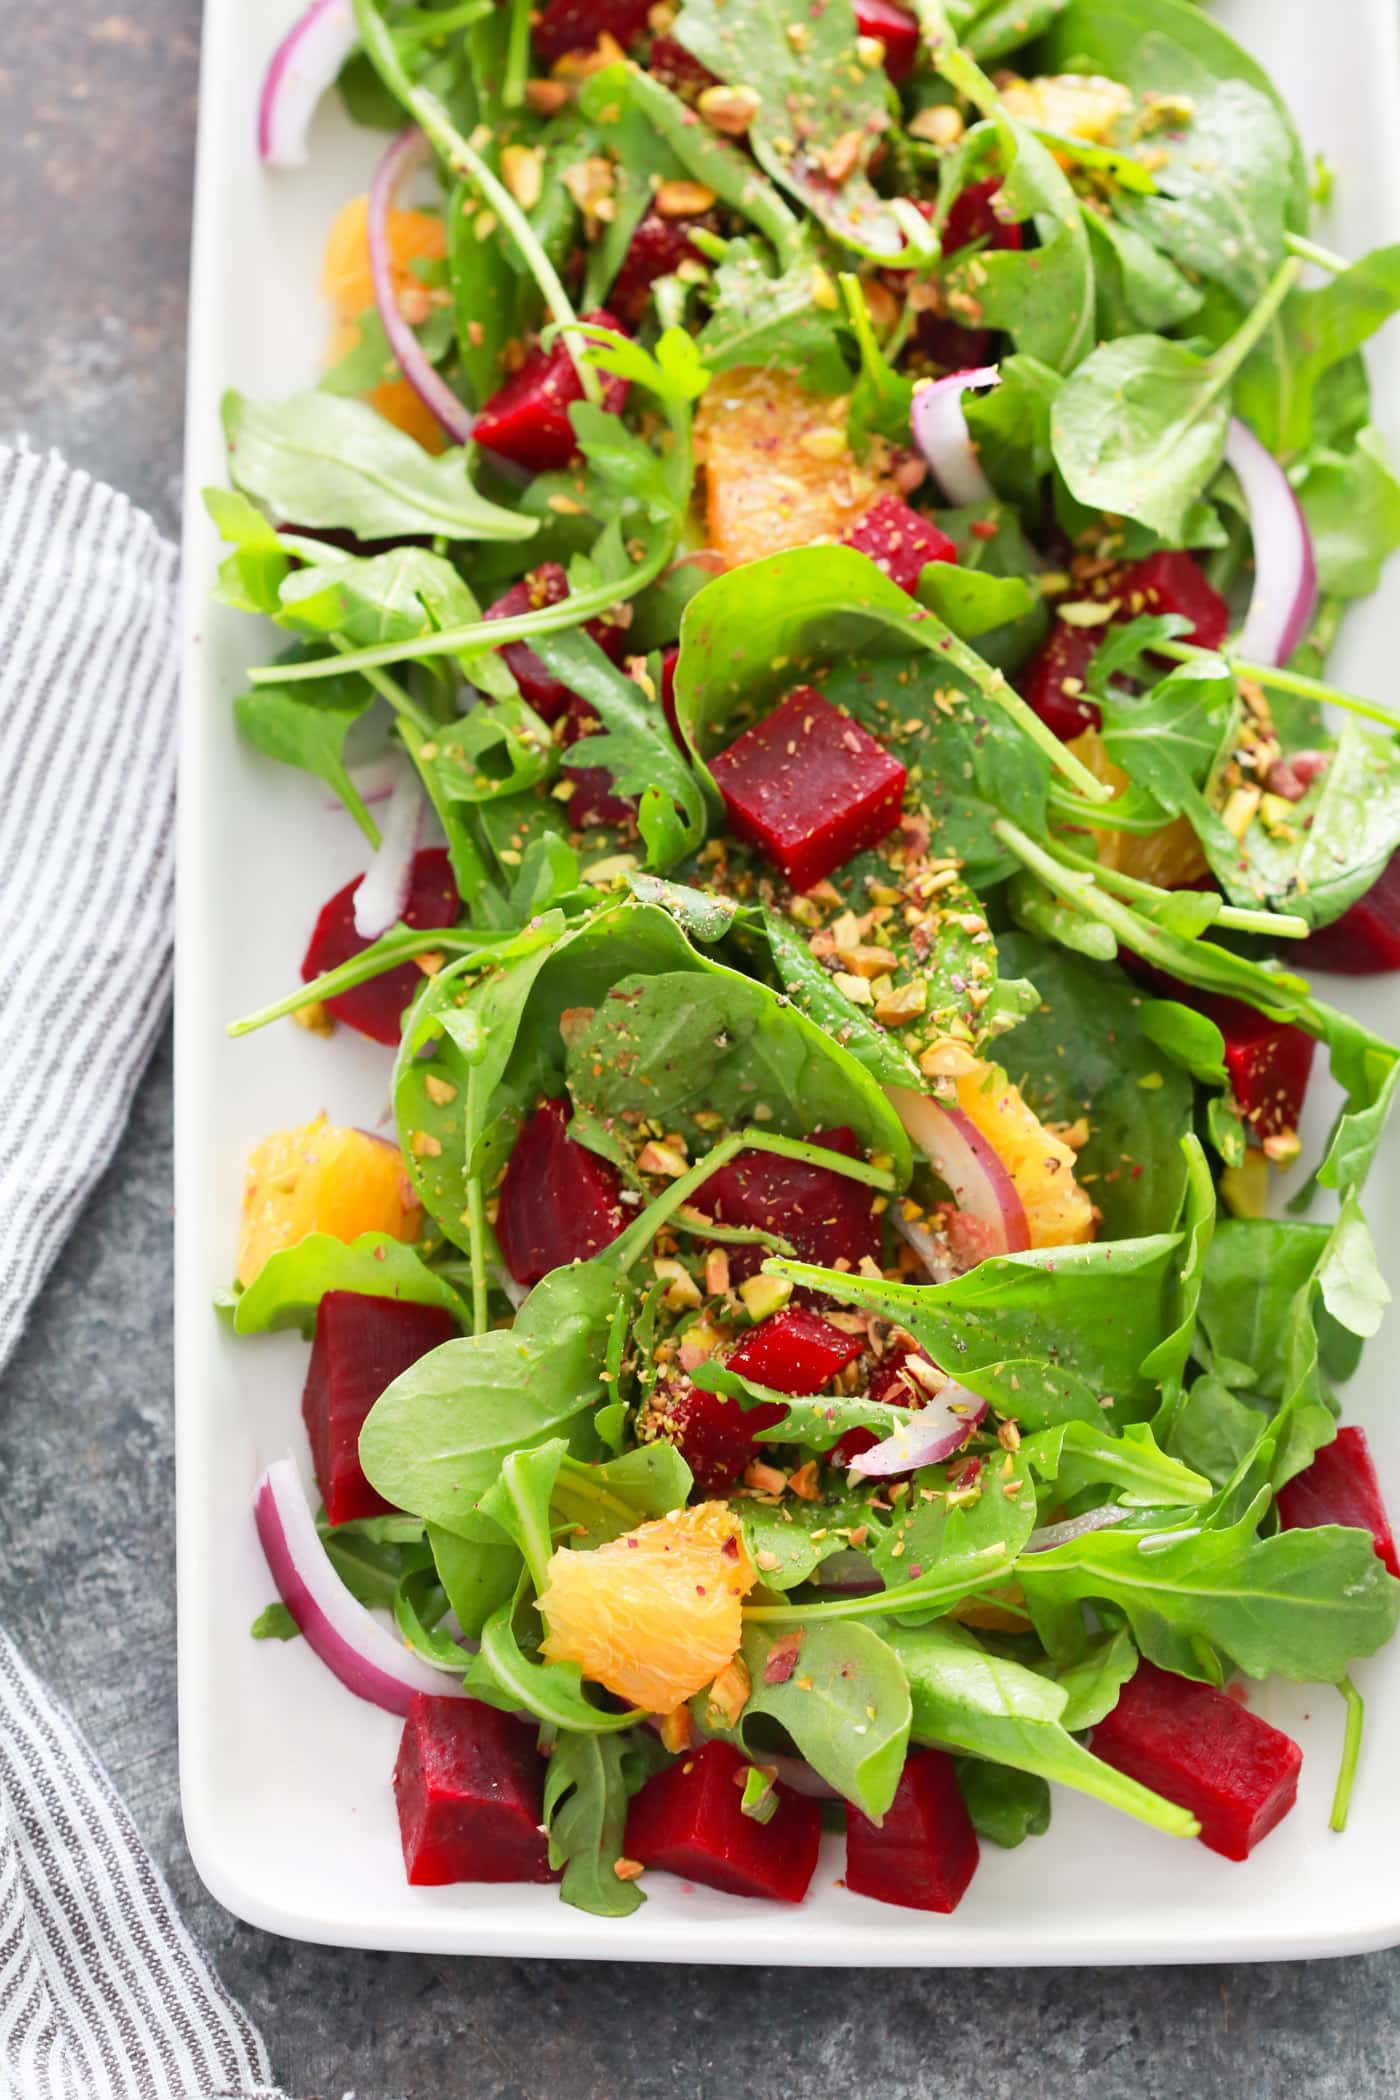  This Autumn Beet Orange Salad is flavorful, healthy, effortless and it’s tossed with a tangy orange mustard vinaigrette. 